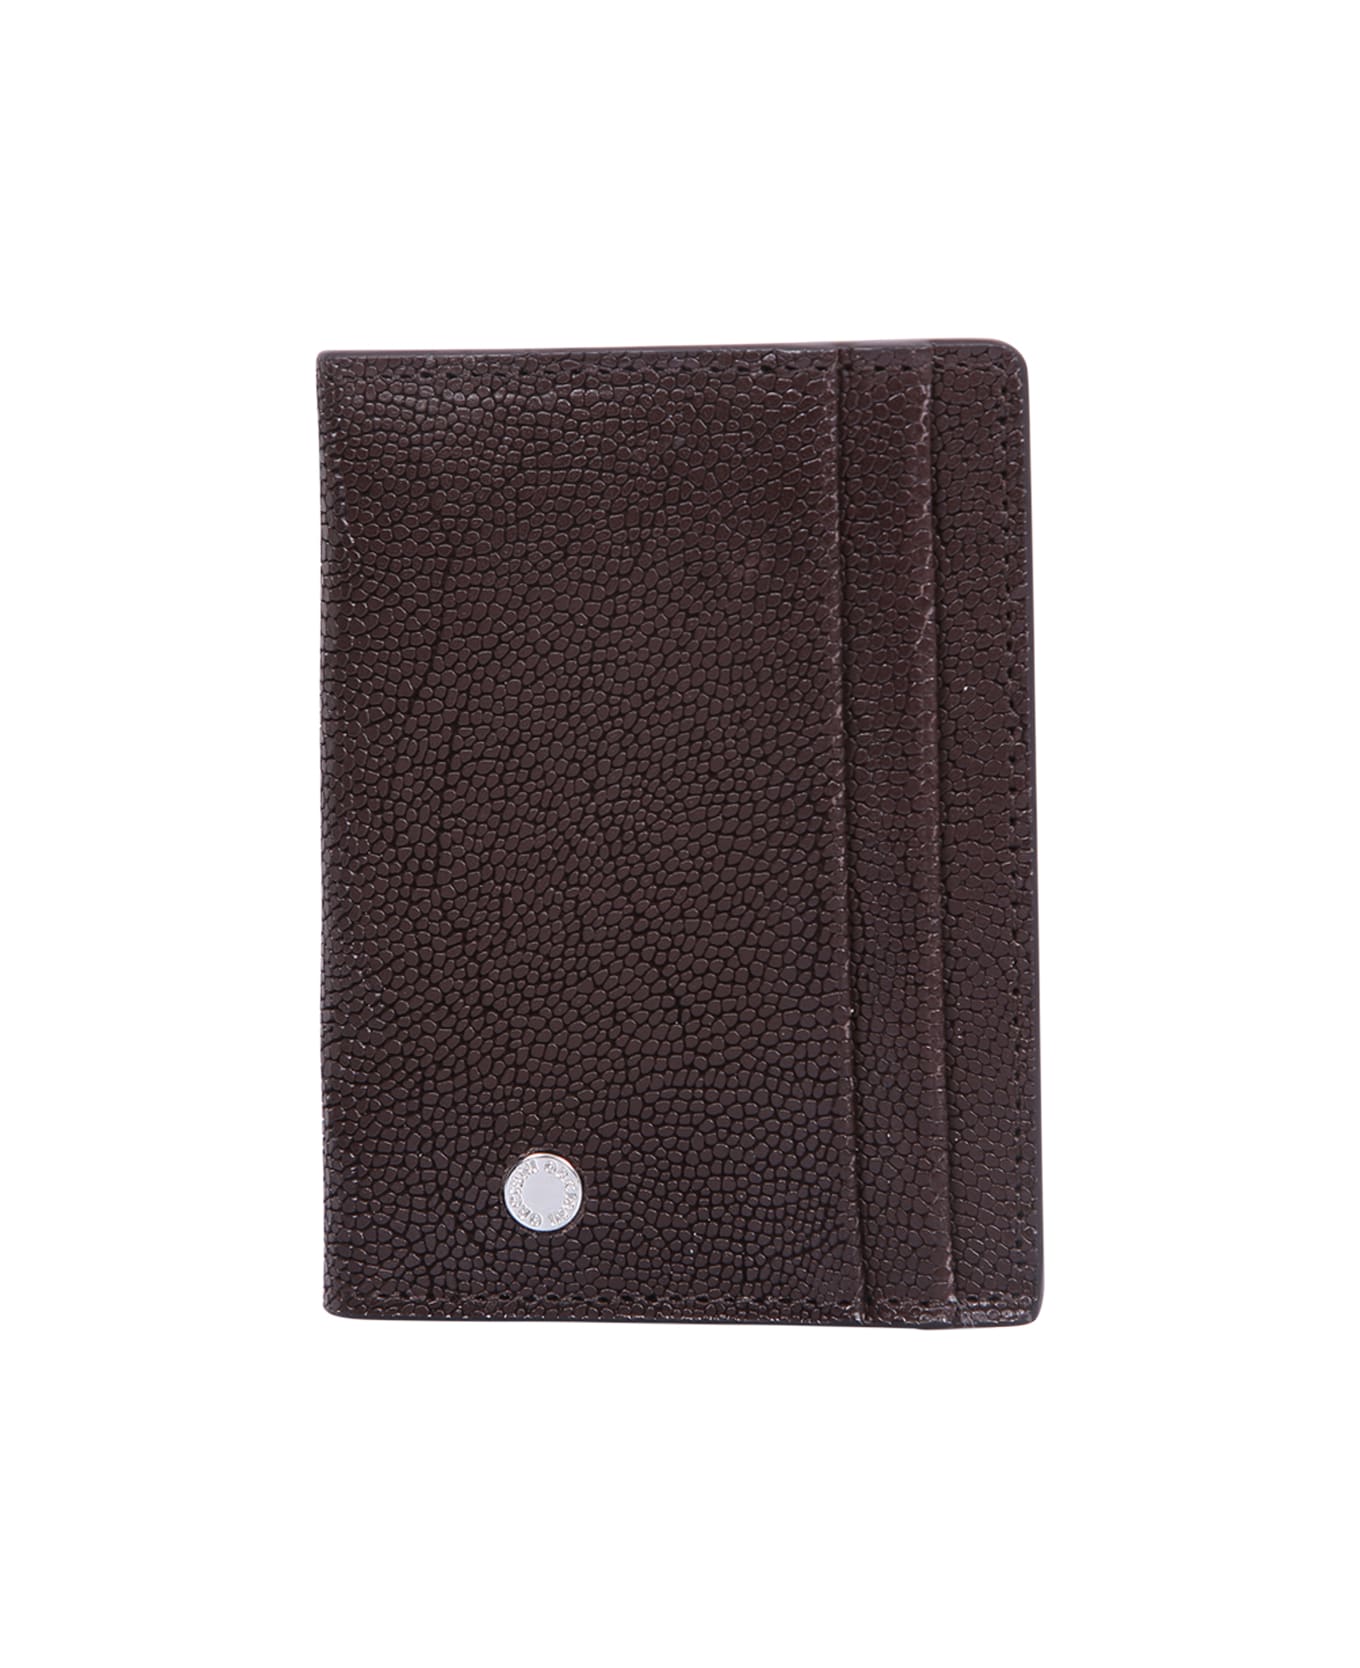 Orciani Leather Wallet - Brown